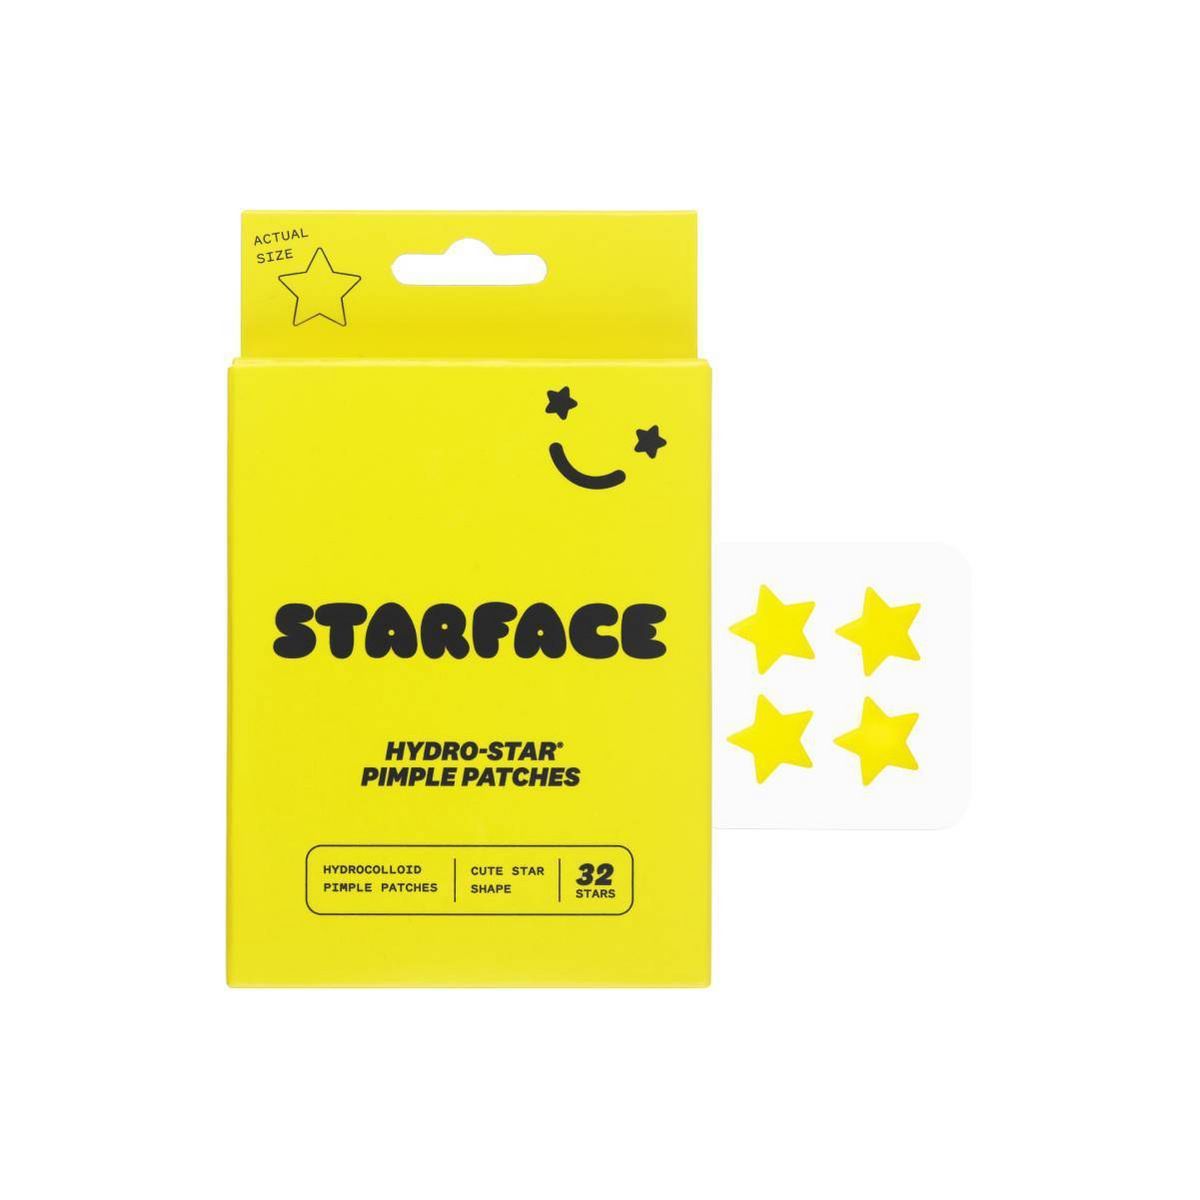 Starface Hydro-Star Pimple Patches Refill - 32ct | Target